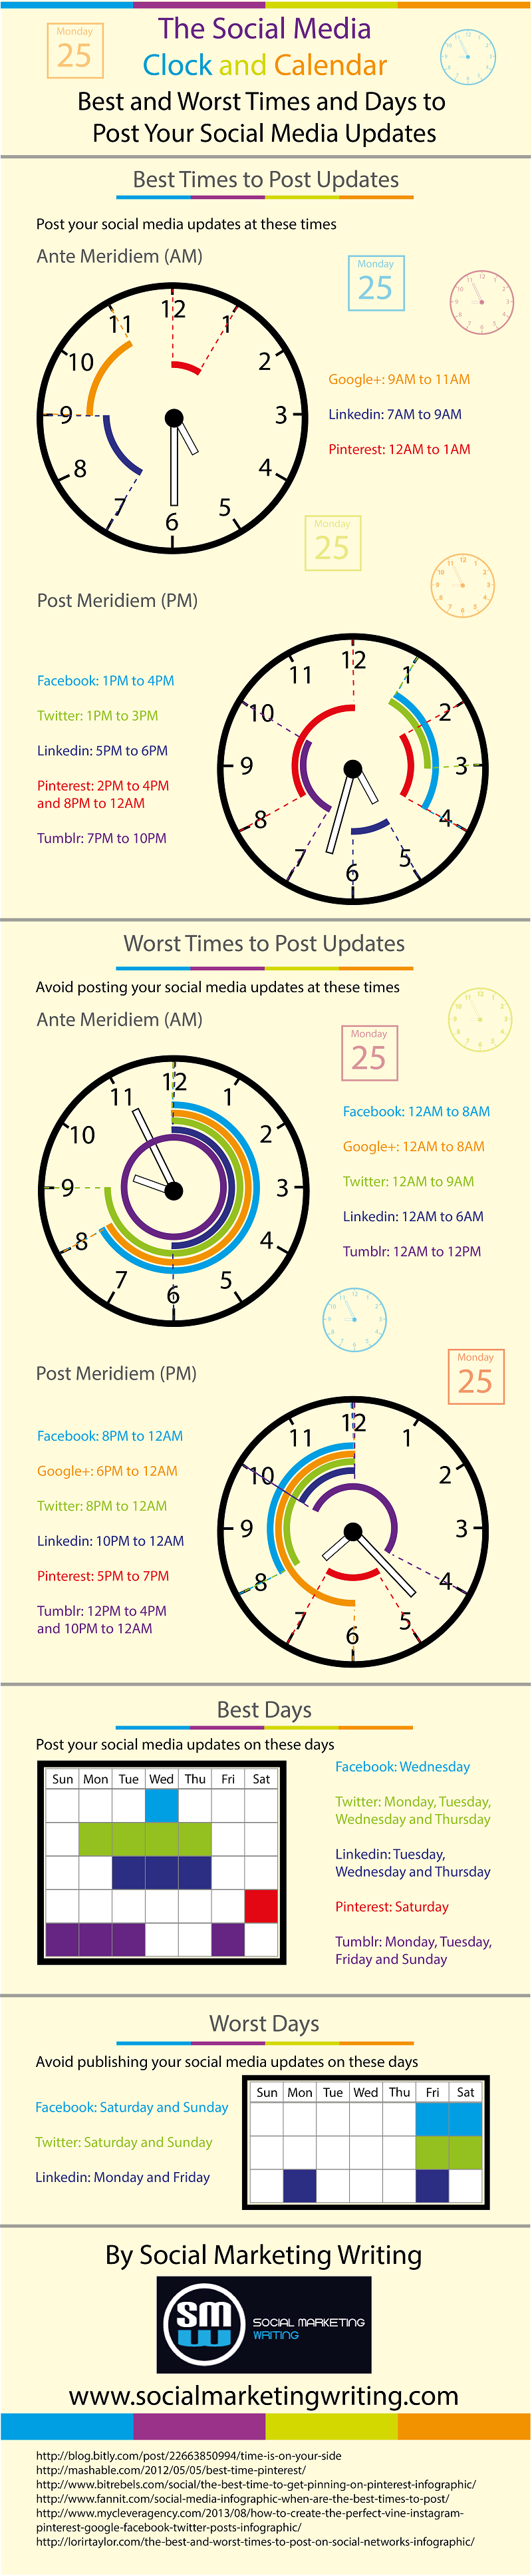 Best-and-Worst-Times-and-Days-to-Post-Your-Social-Media-Updates-Infographic